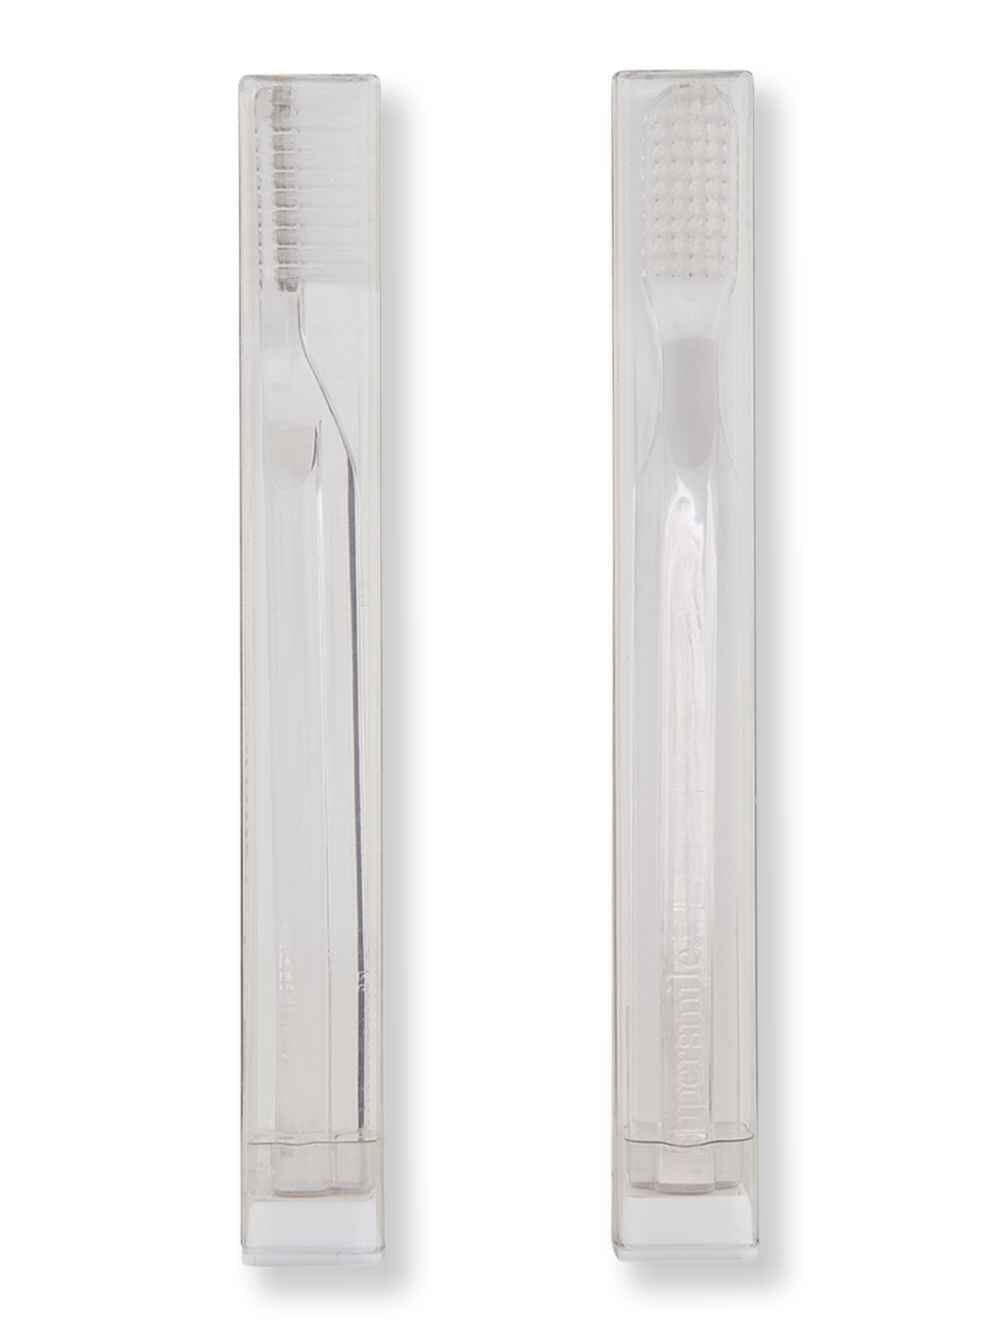 Supersmile Supersmile New Generation Toothbrush Clear 2 Ct Electric & Manual Toothbrushes 